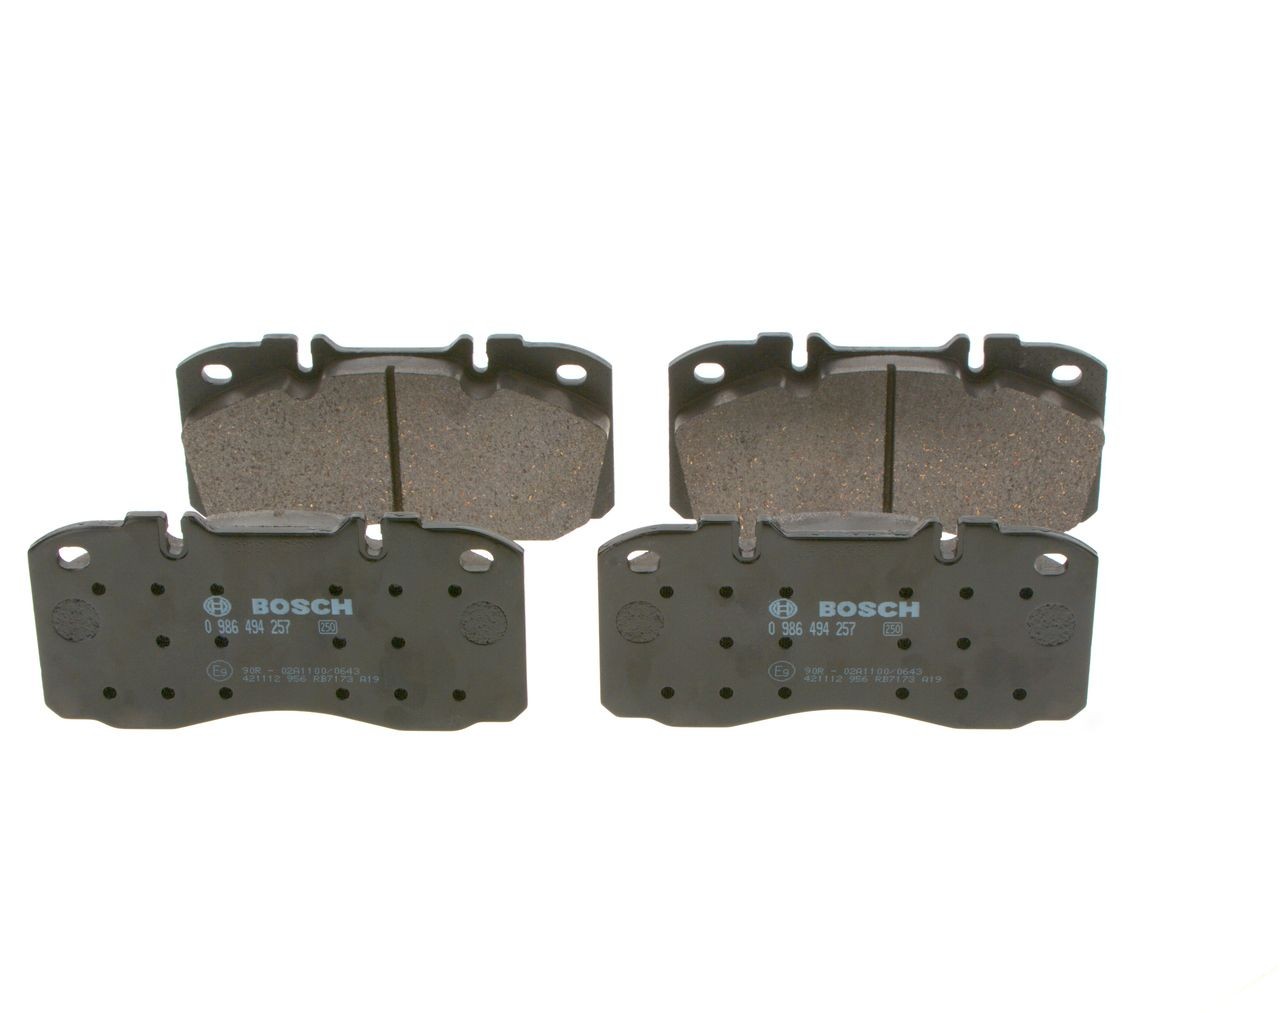 BOSCH Brake pad kit 0 986 494 257 for IVECO Daily